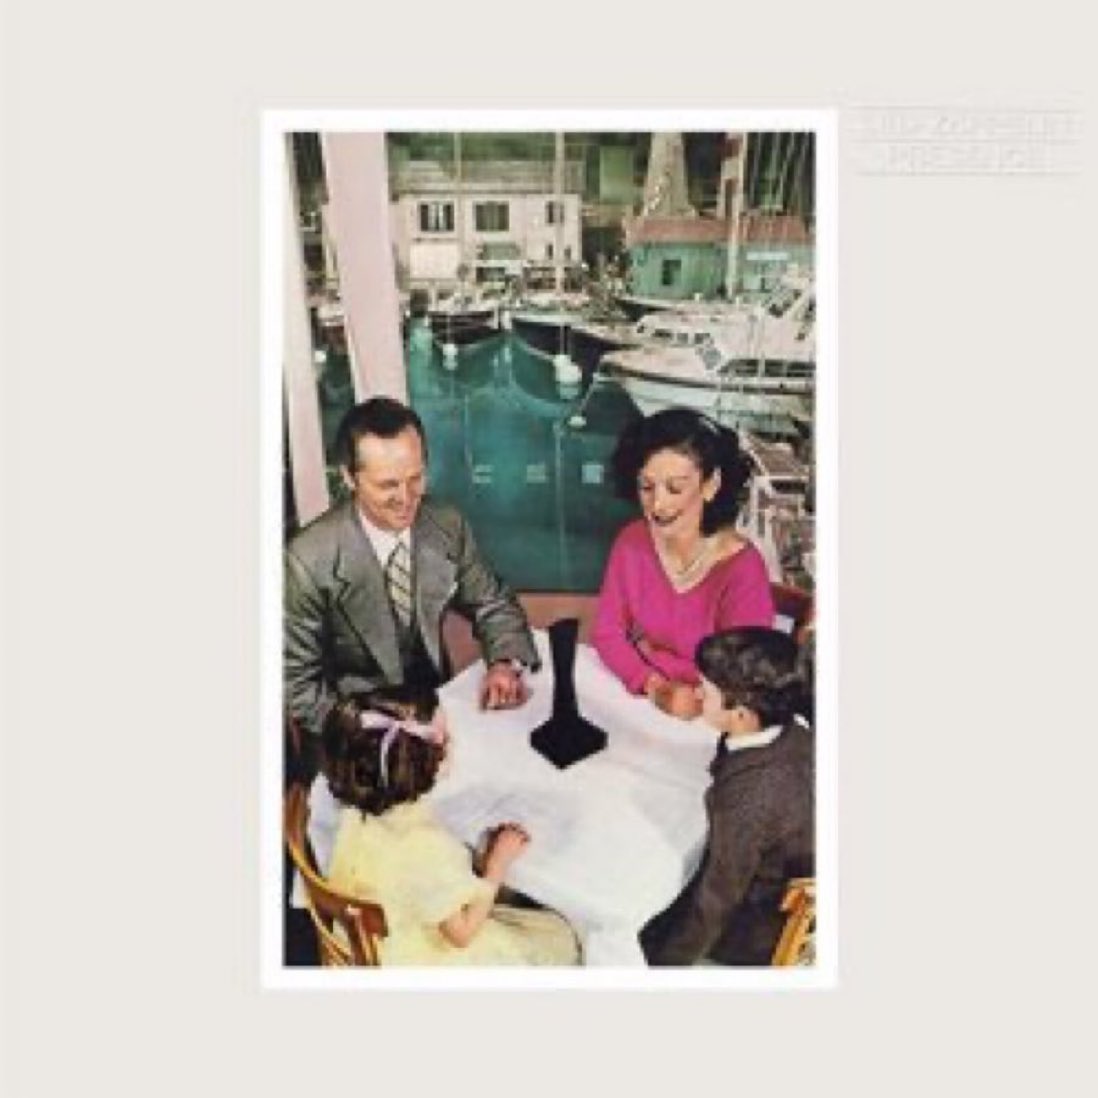 On May 1, 1976, “Presence” by Led Zeppelin began a two week run as the number one album in the US. #LedZeppelin